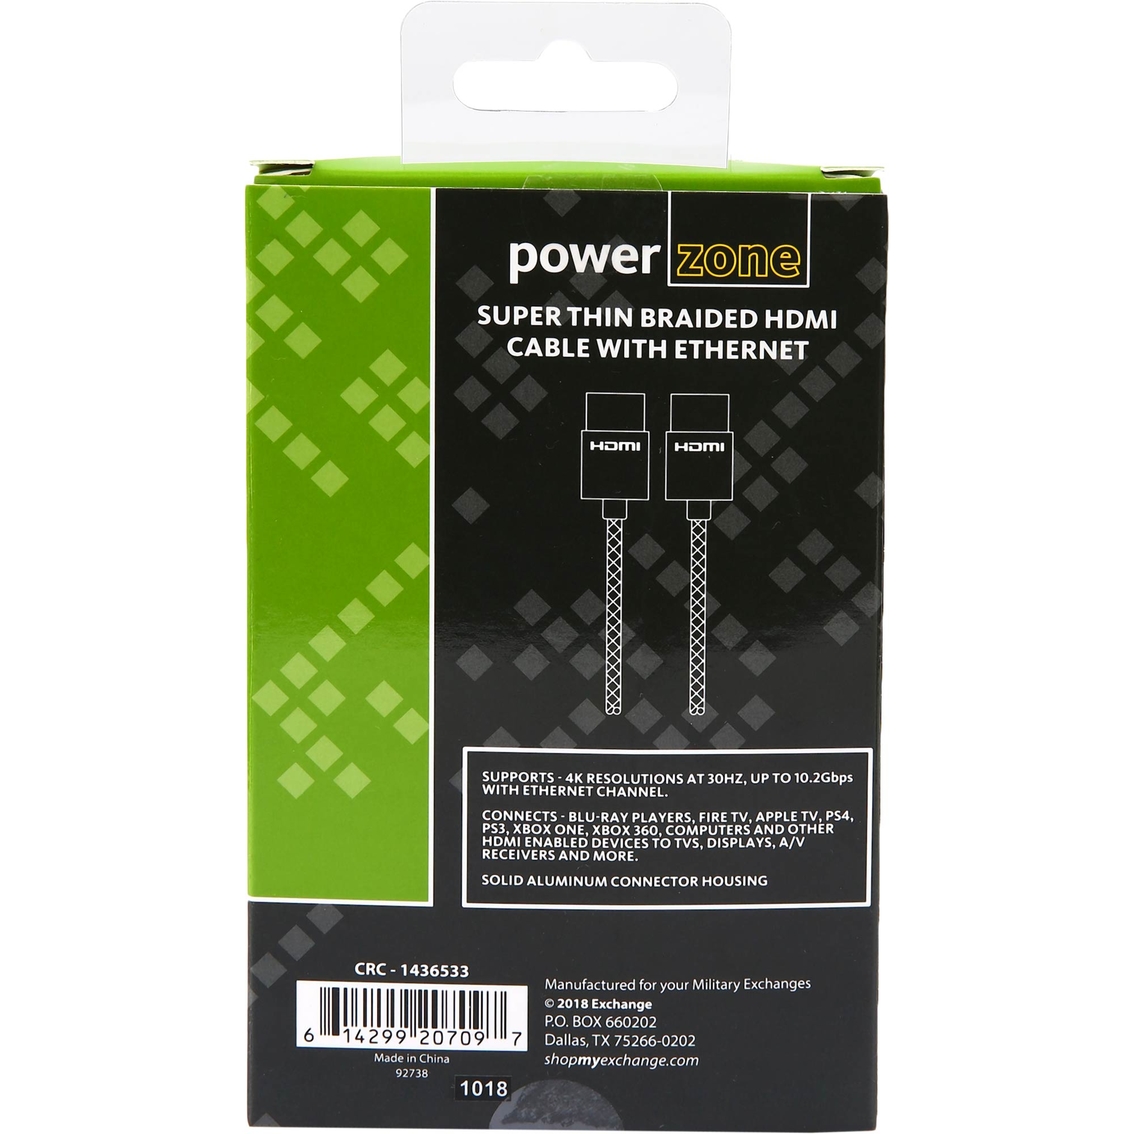 Powerzone Super Thin Braided HDMI Cable with Ethernet - Image 4 of 4